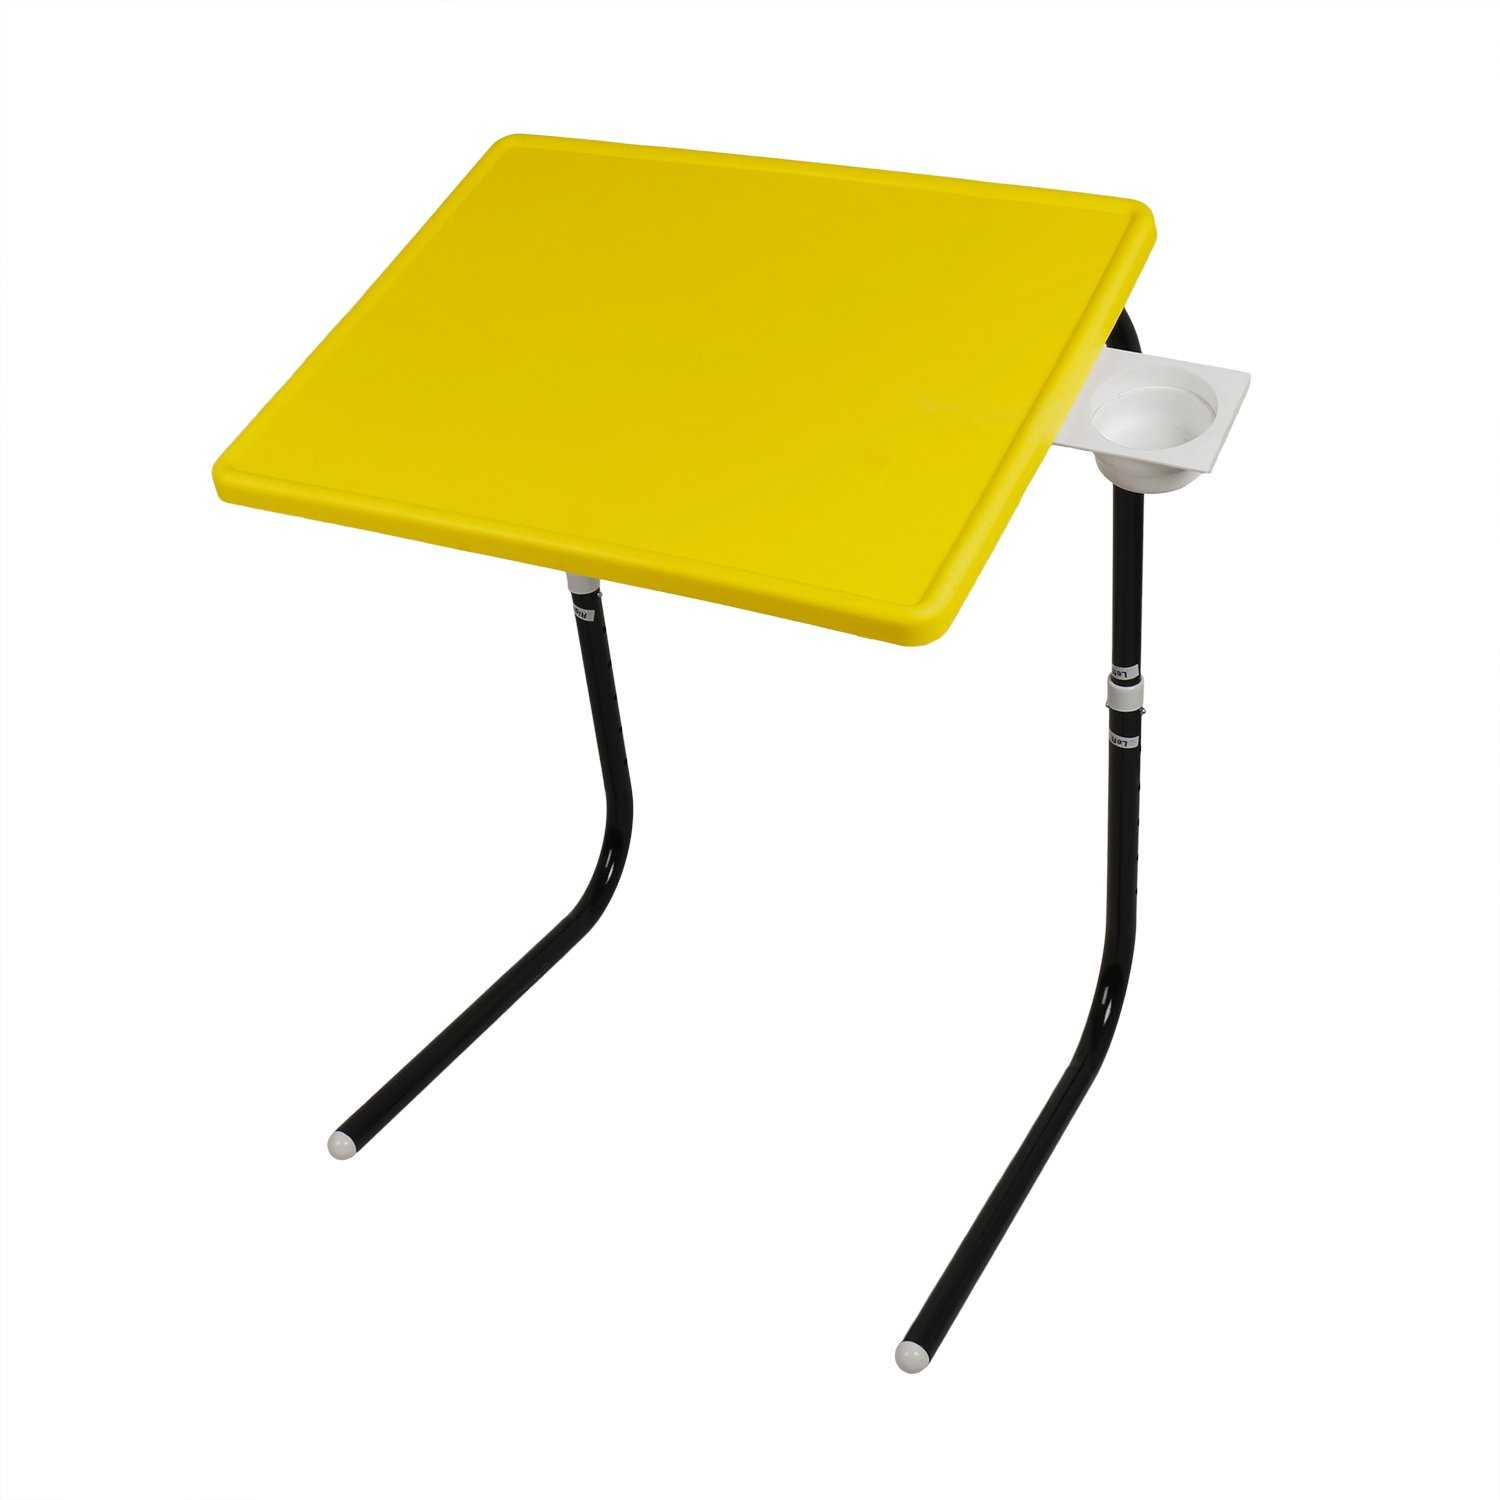  Table mate with black legs and yellow finishing | Wudore